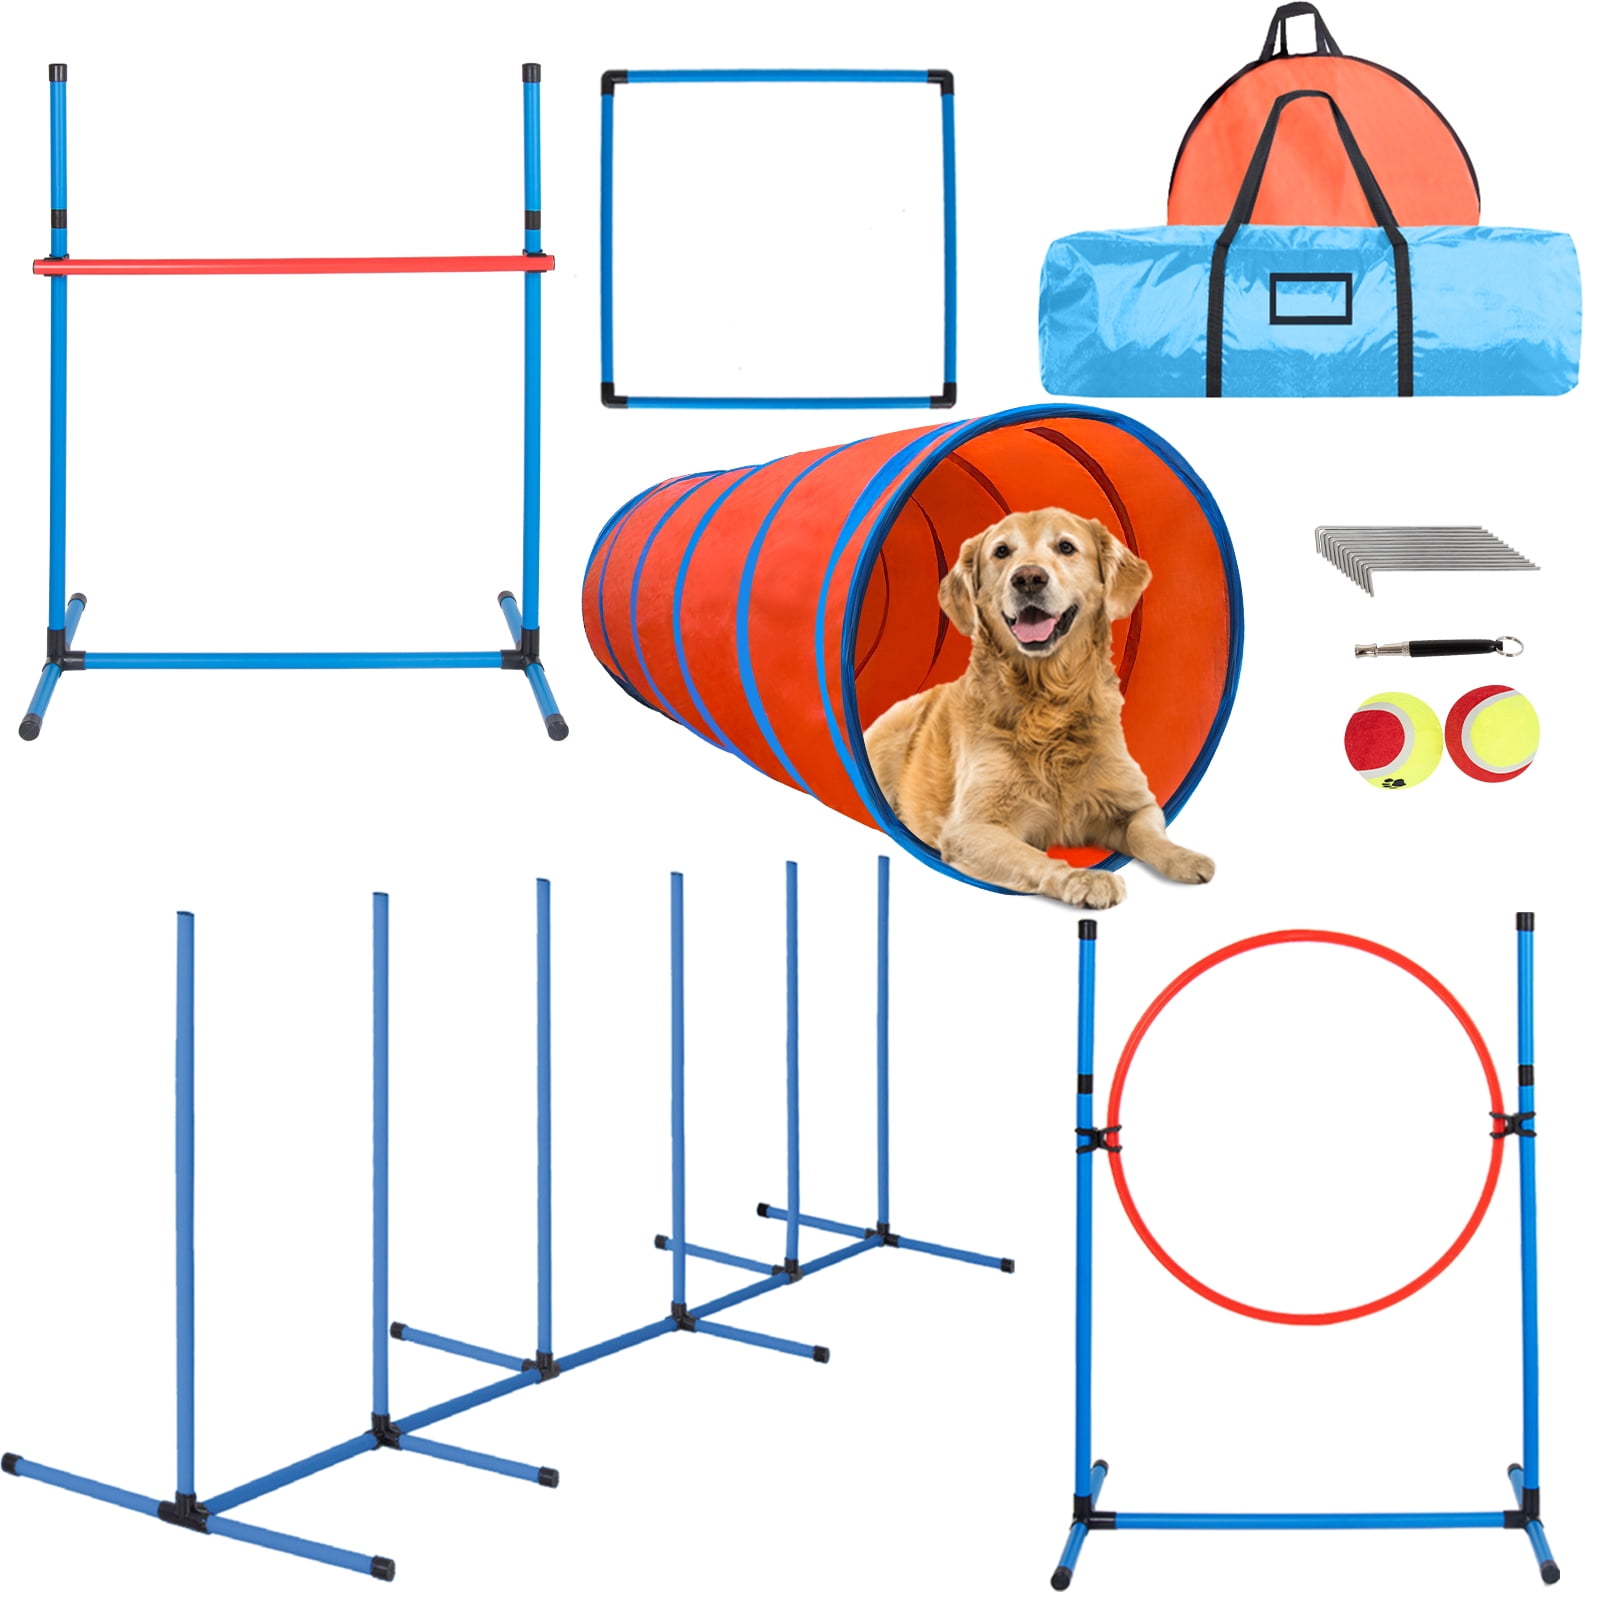 Polar Aurora Agility Training Equipment for Dogs, Obstacle Course Practice Adjustable High Hurdle, 6 Poles, Extended Tunnel, Jumping Ring, Square Pause Box and 2 Carrying Bags - Walmart.com